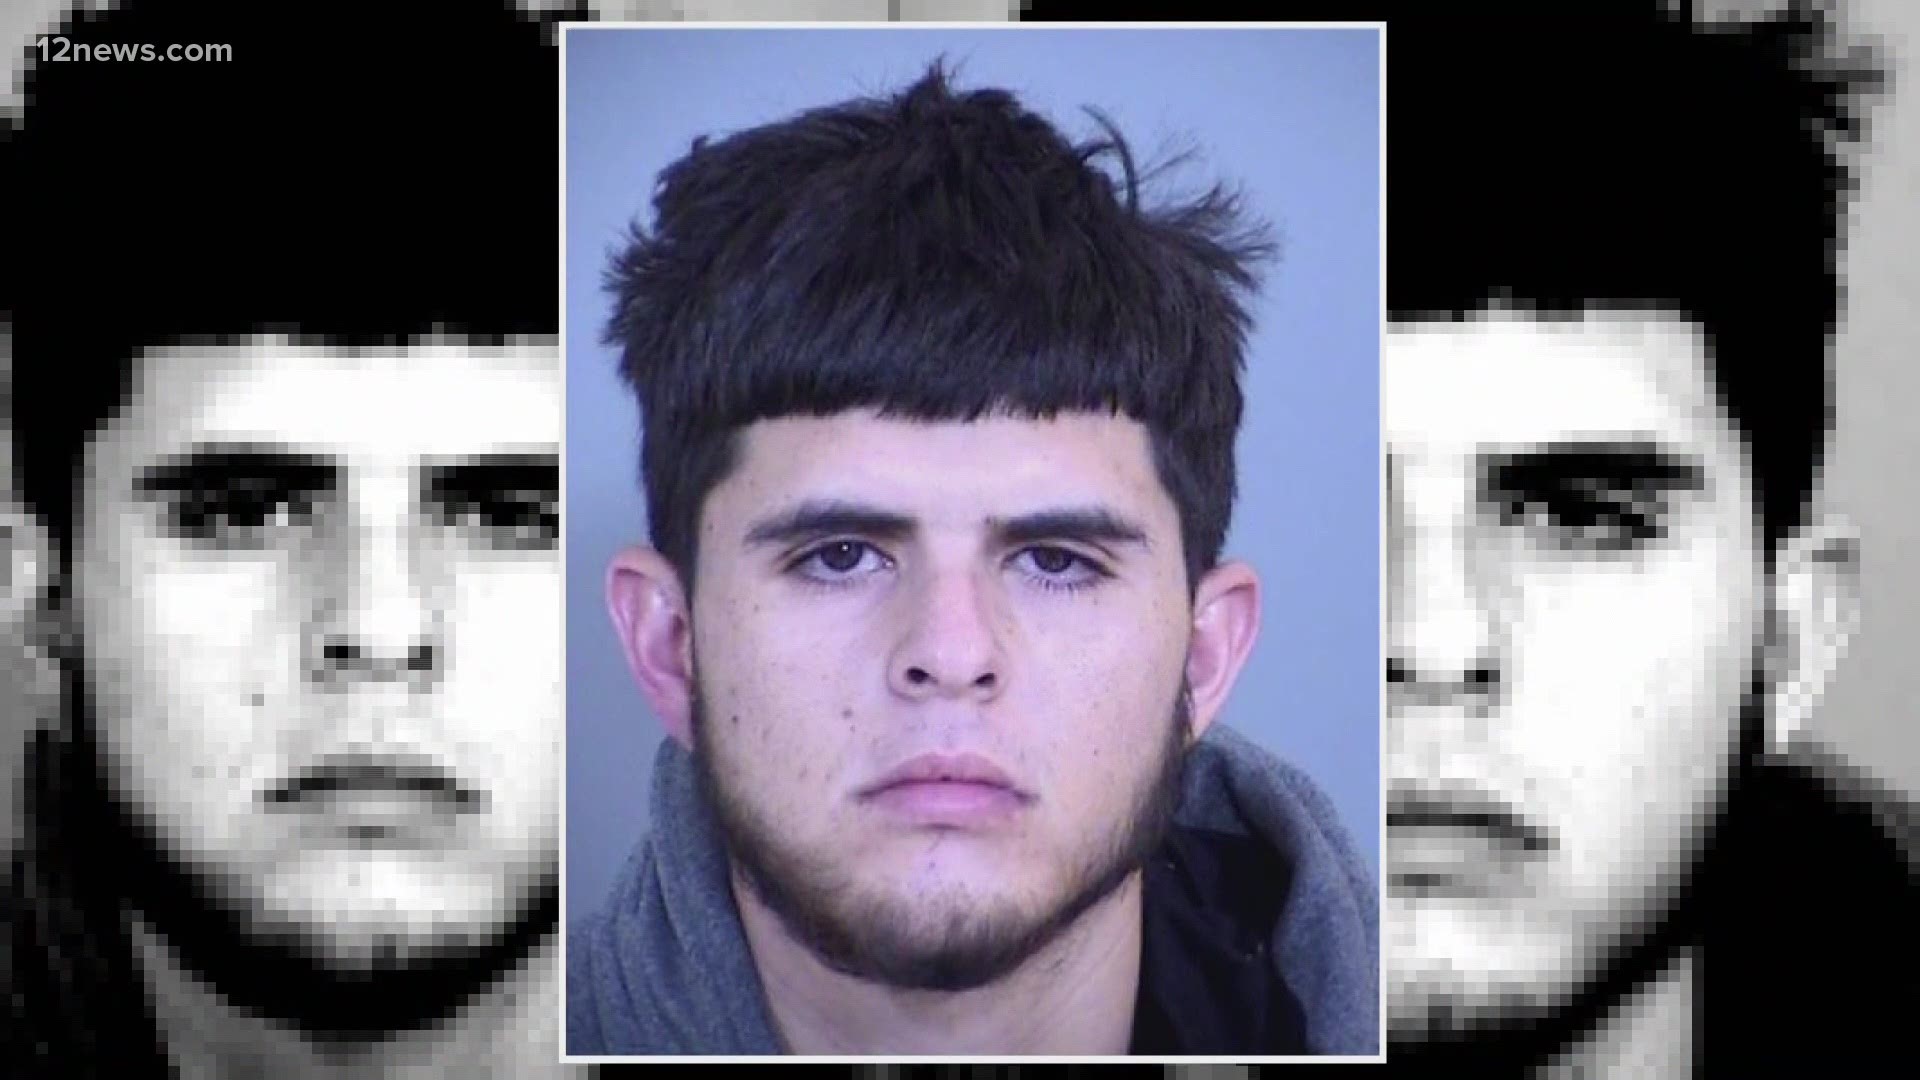 Investigators say Rodrigo Garcia stole a BMW sedan that was parked and still running outside a convenience store.